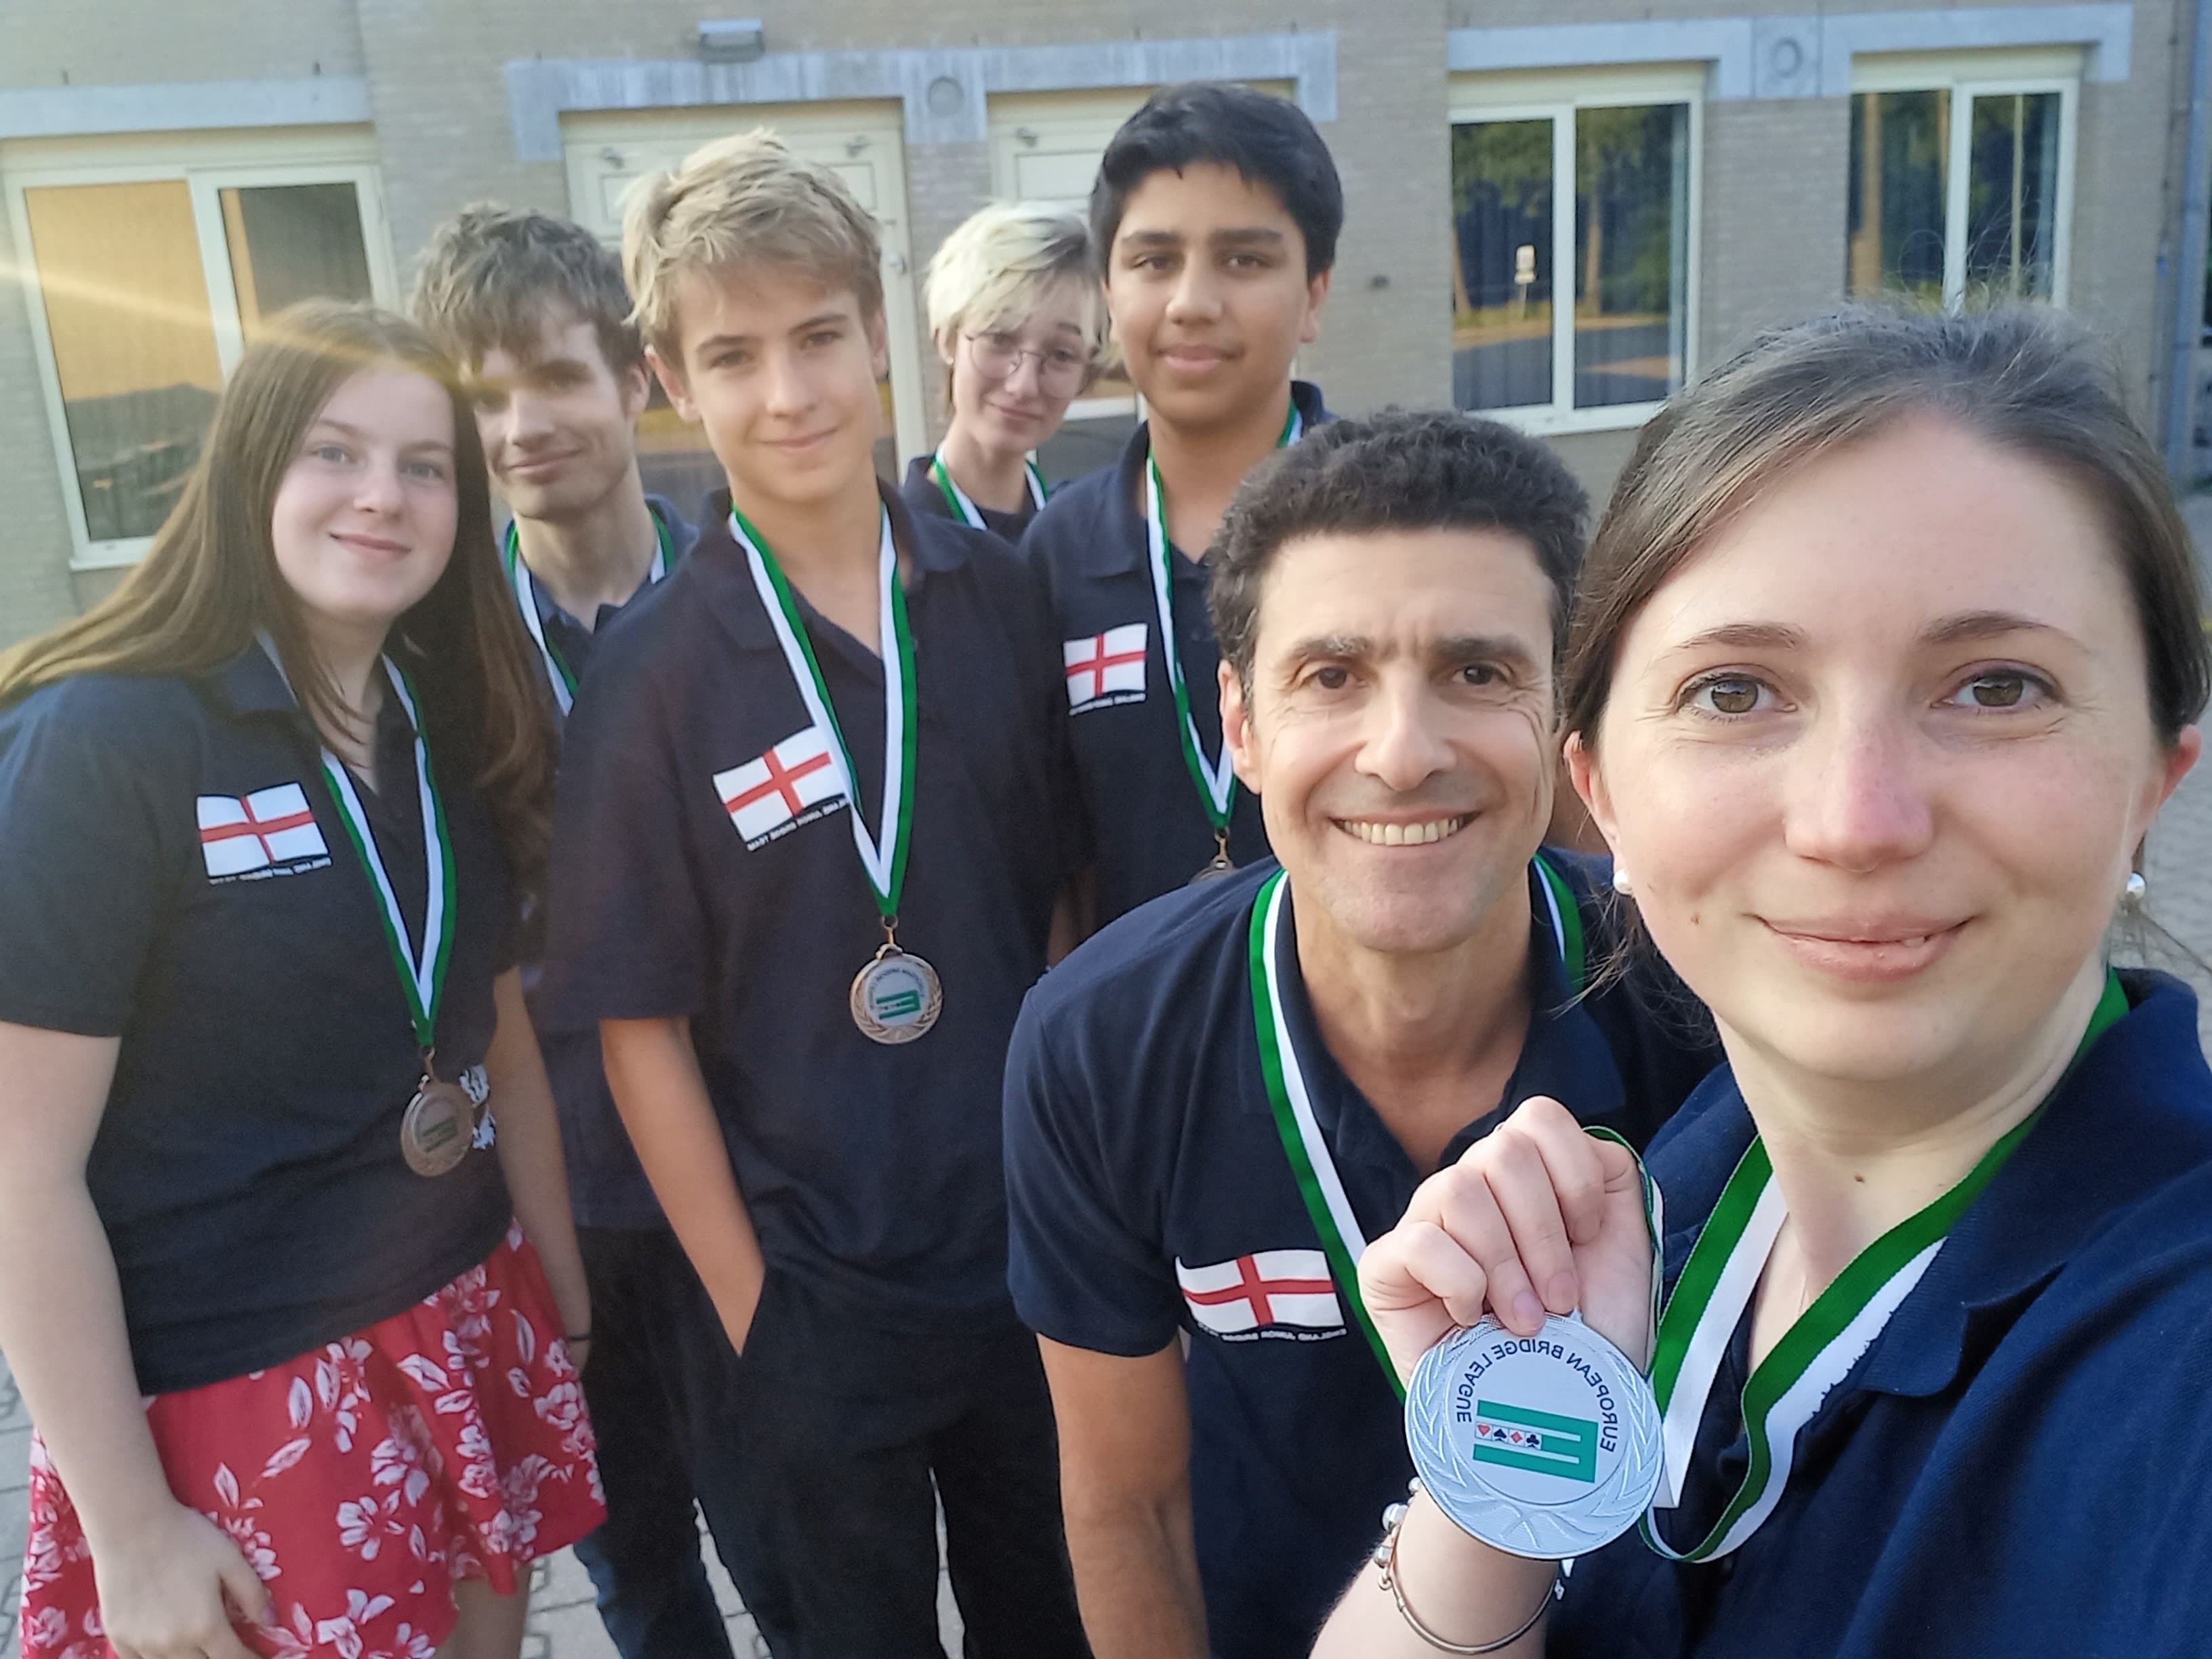 EBU Under 16s Youth Team all smiling at the camera and showing off their silver medals